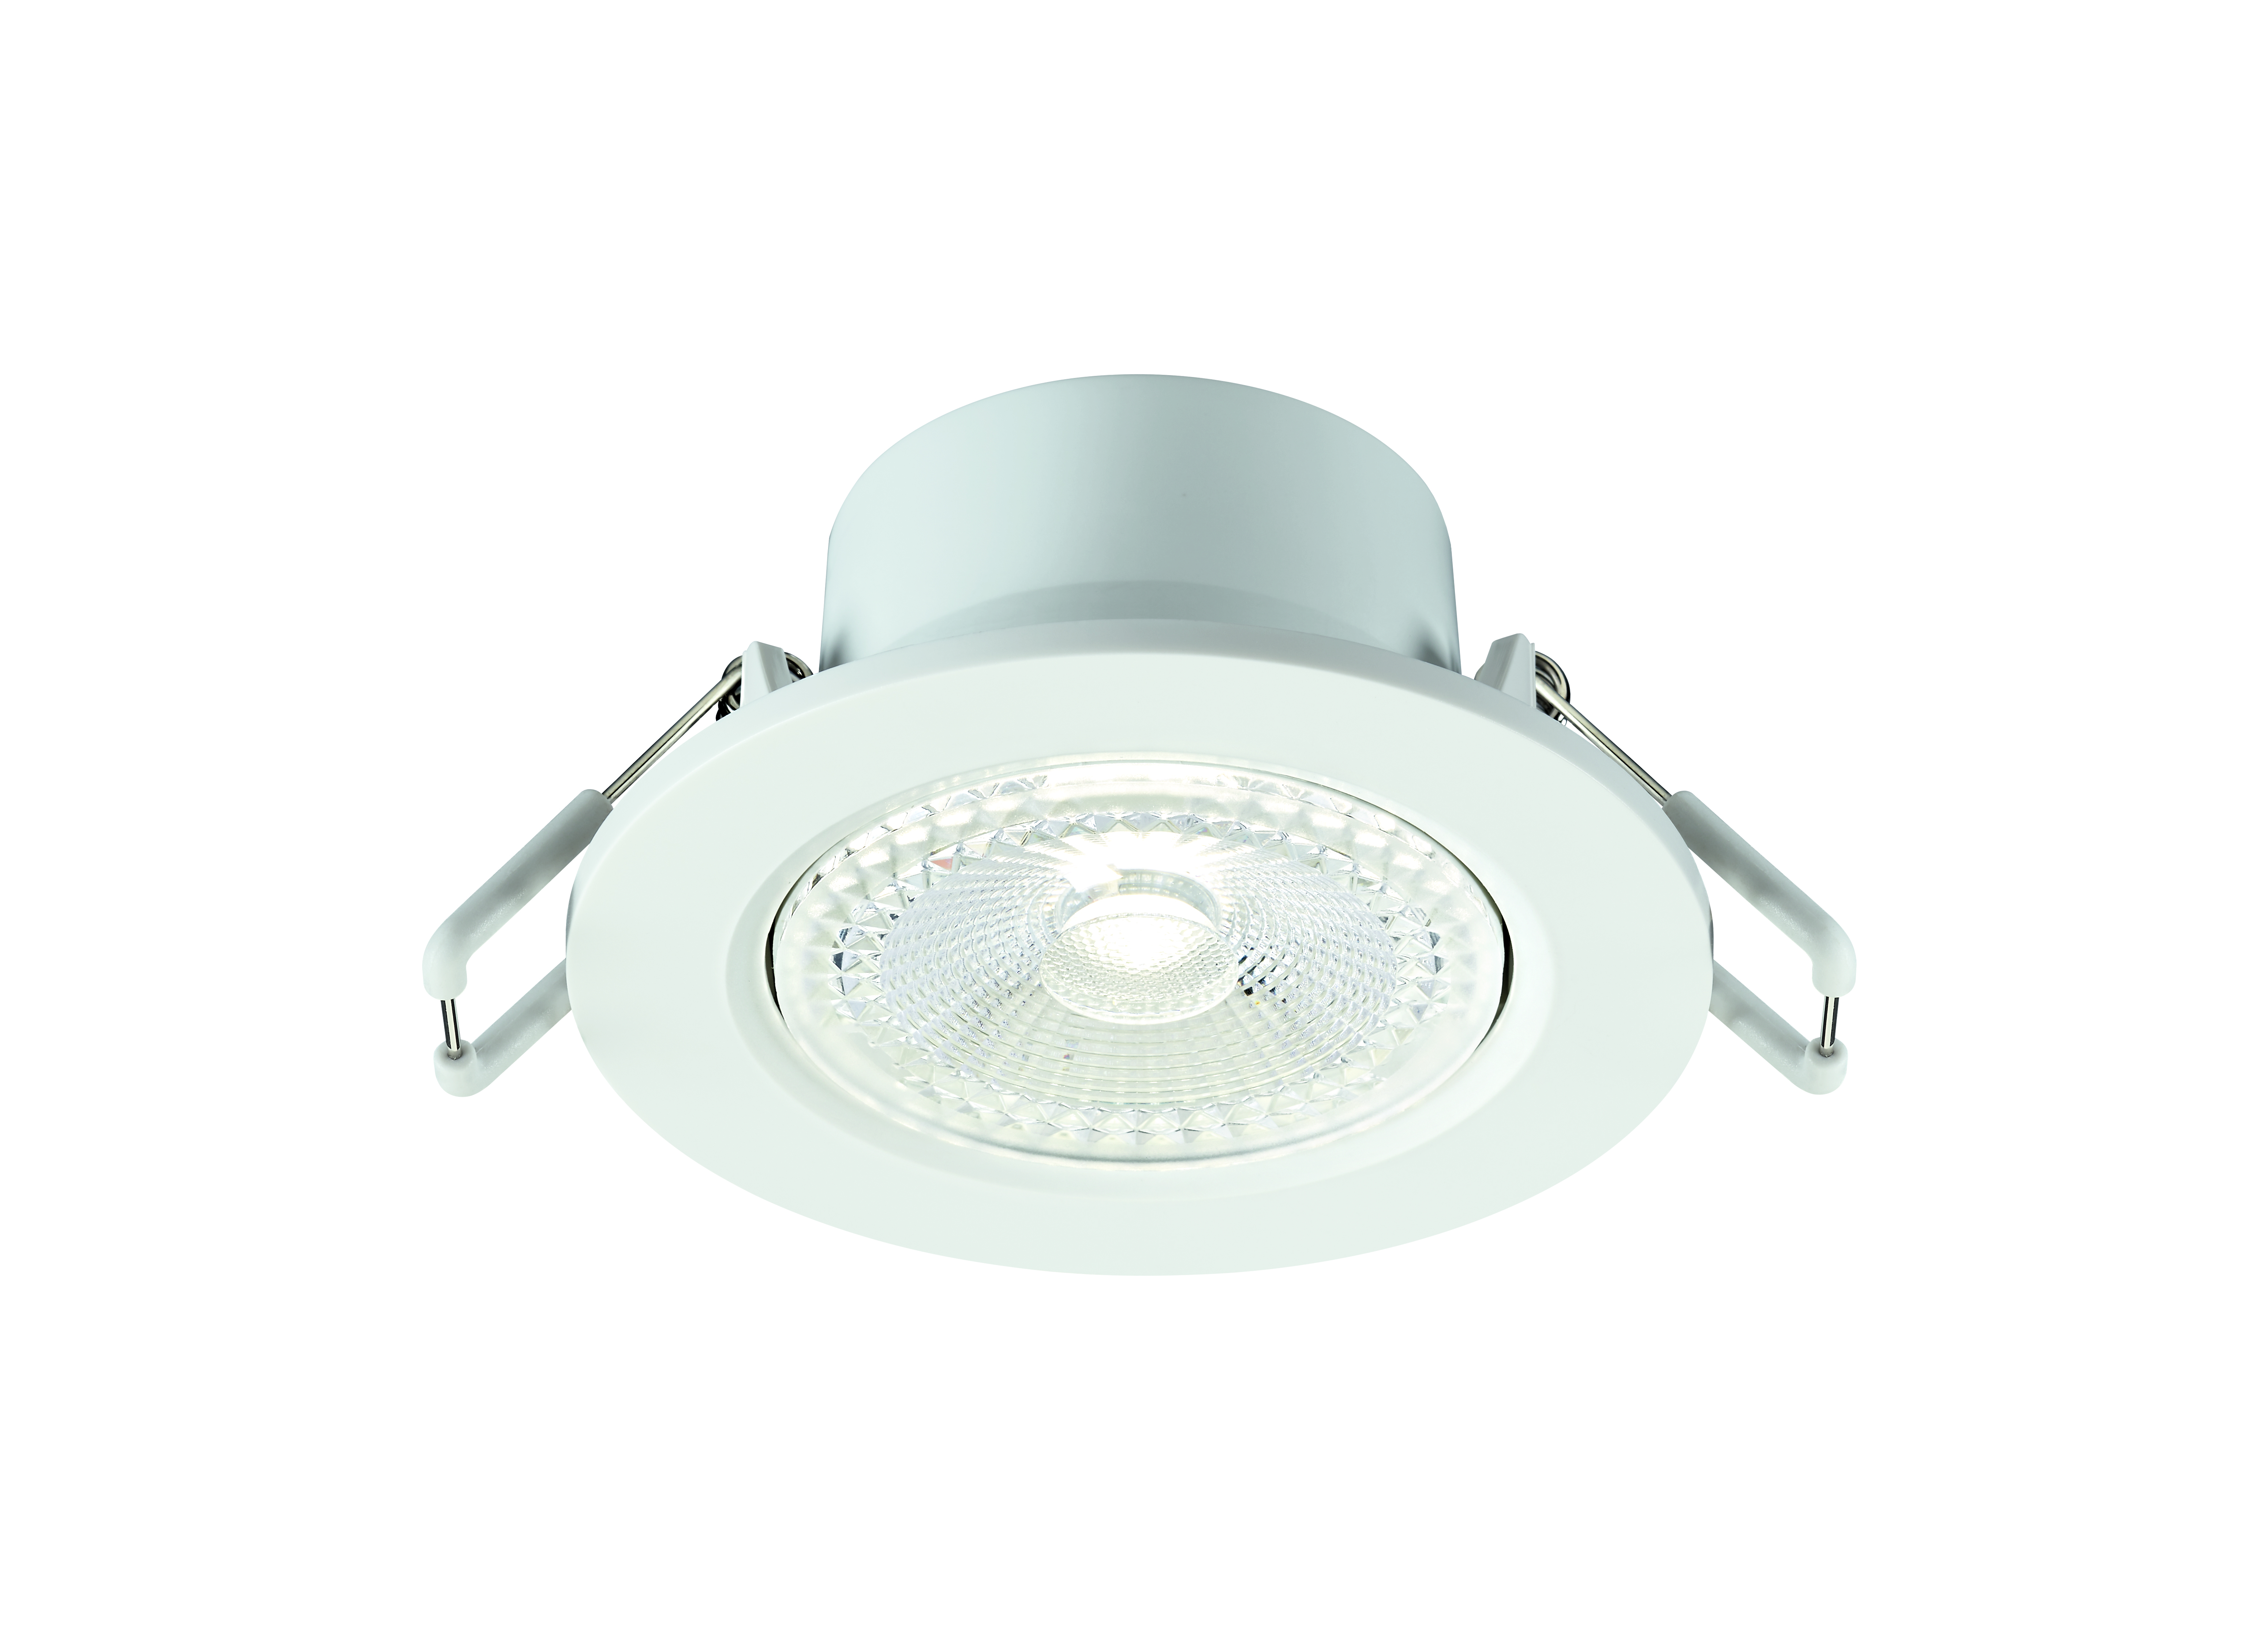 Obico Fire Rated | Sylvania Lighting Solutions